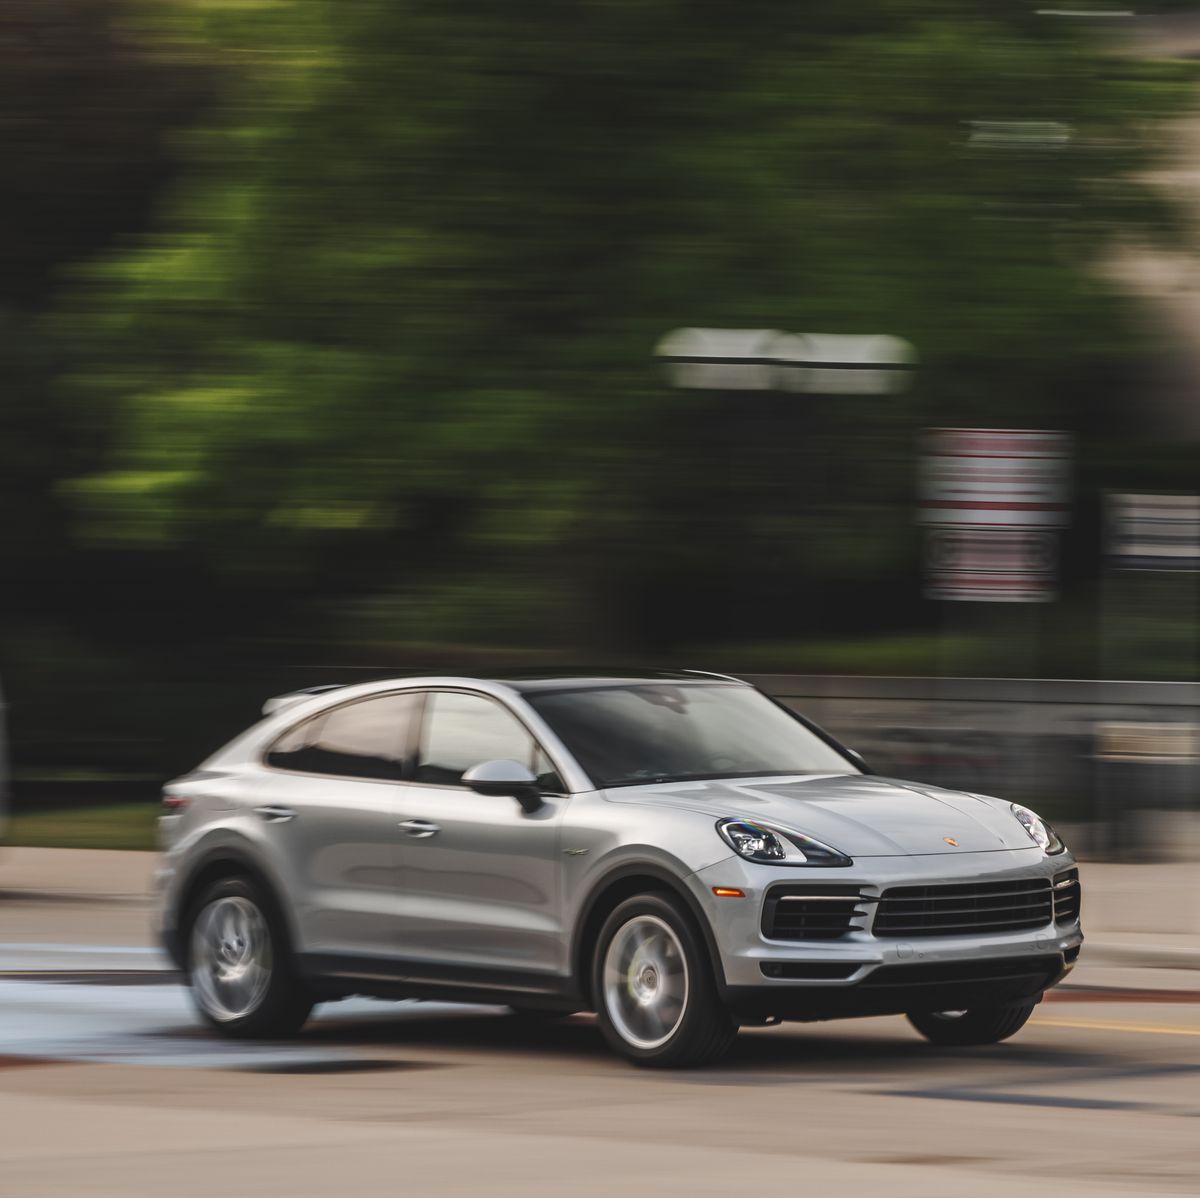 Afbreken honderd Meerdere Tested: 2021 Porsche Cayenne E-Hybrid Coupe and the Three Vs